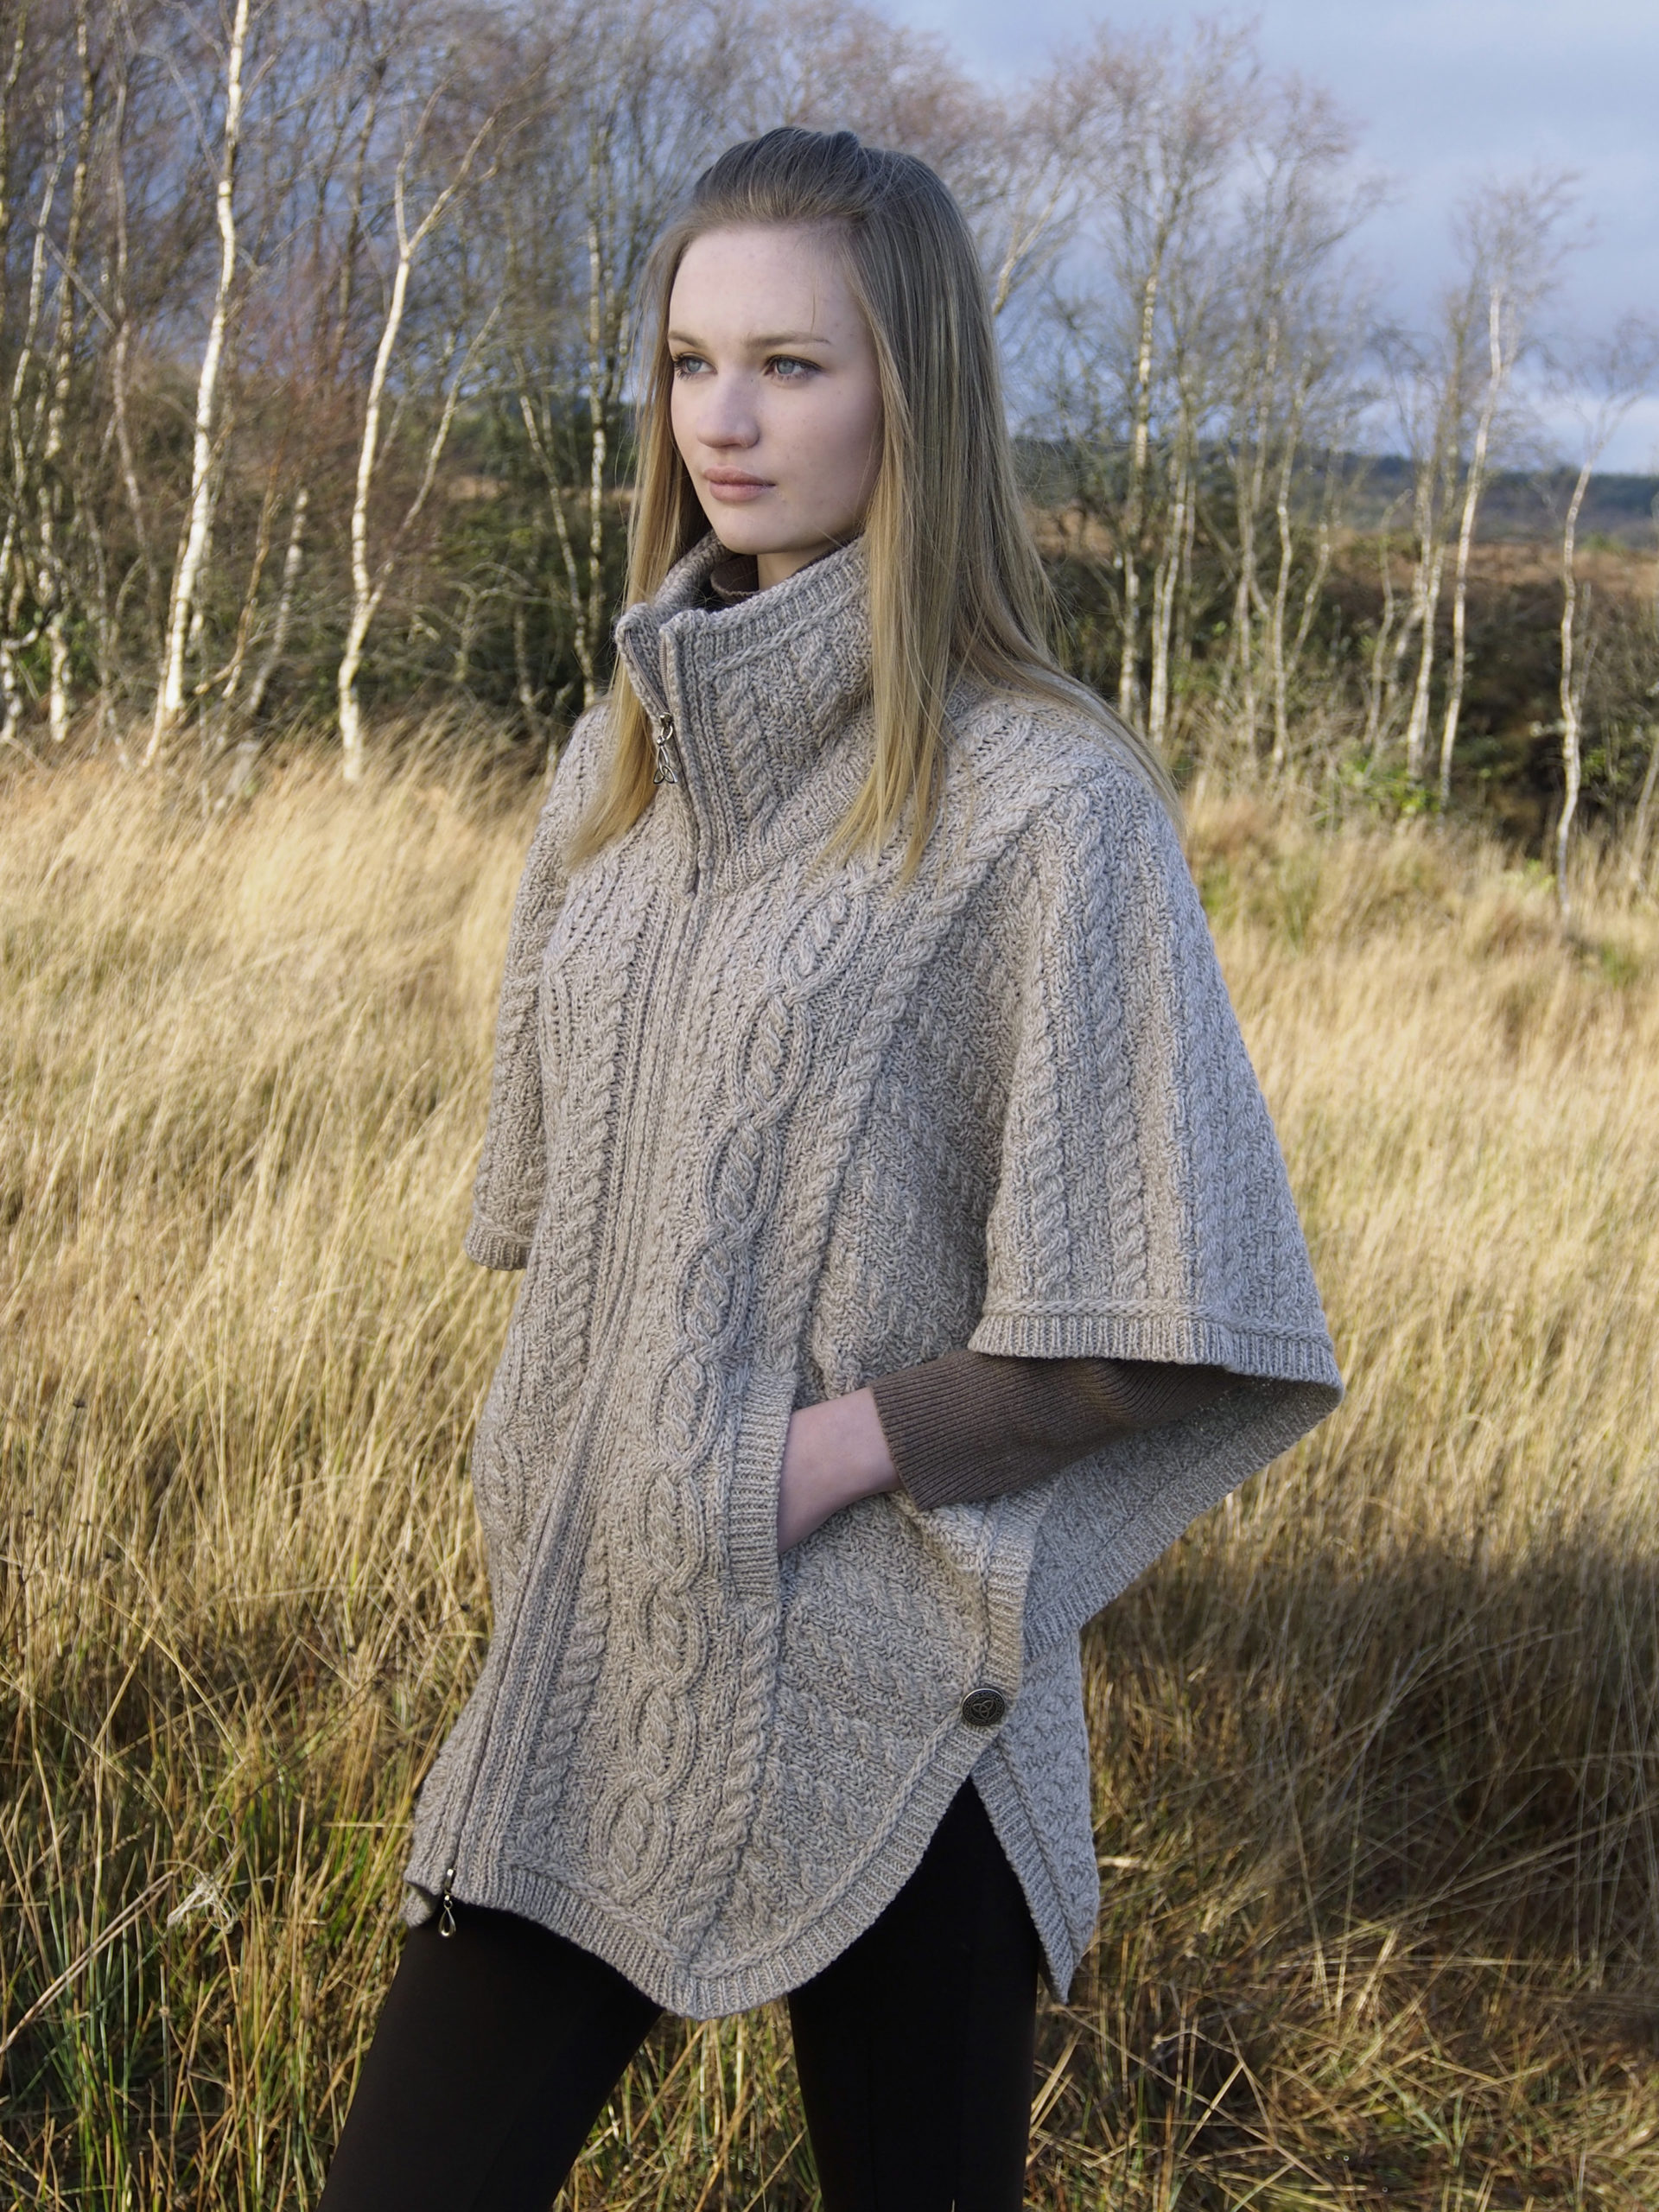 Collared Zip Poncho in Parsnip